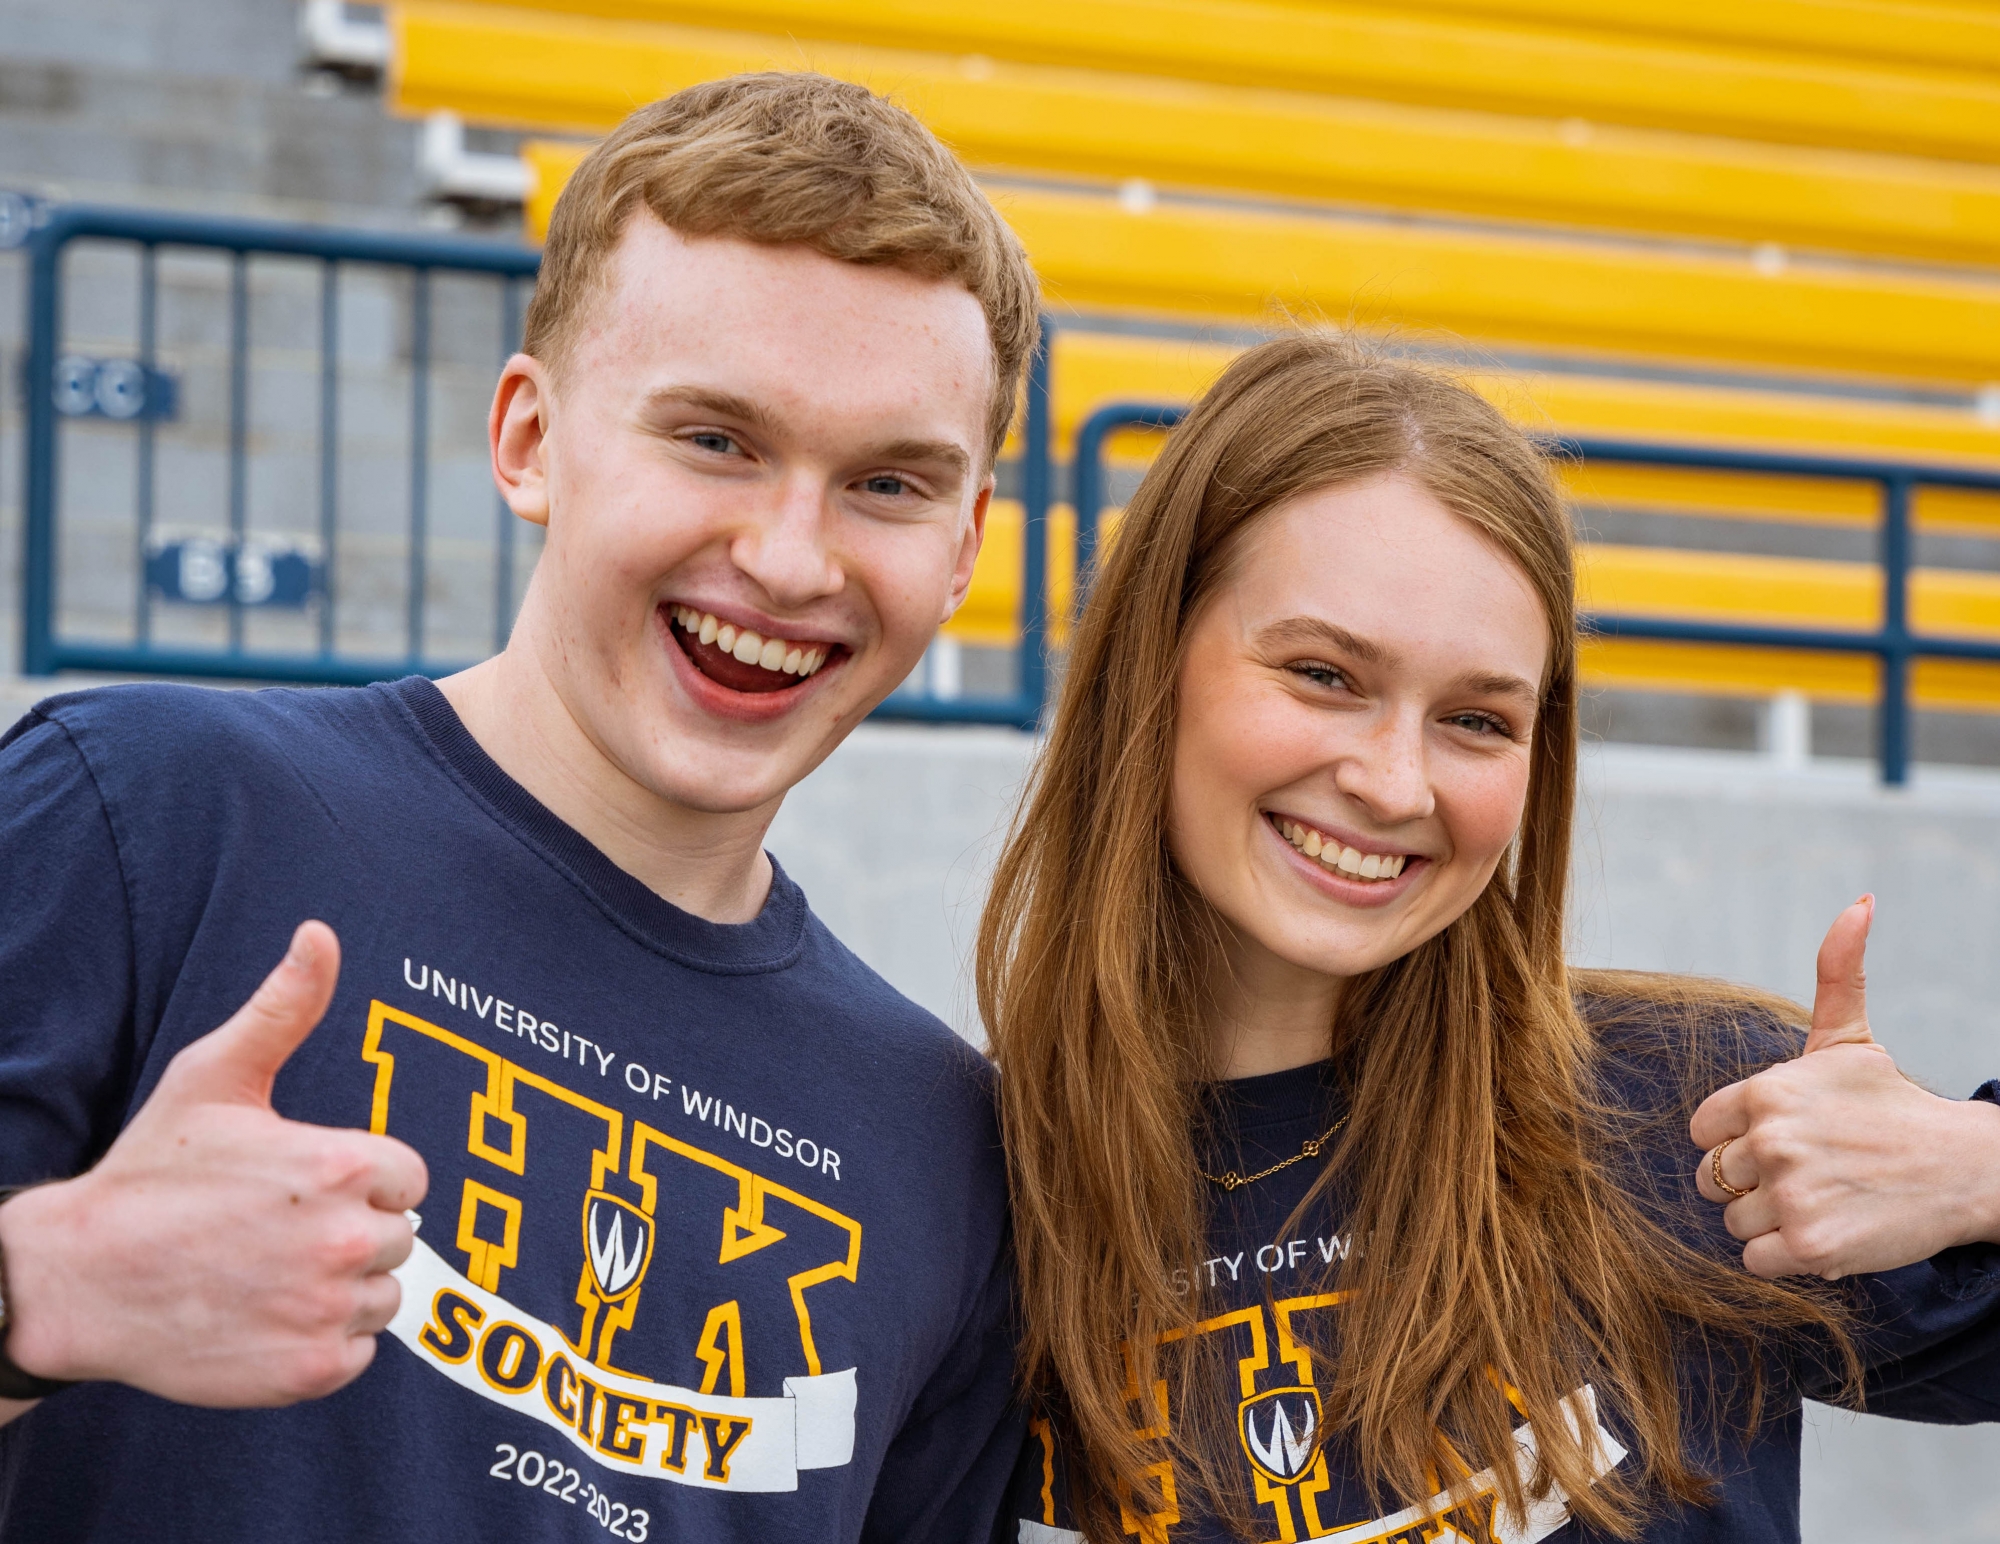 A male and a female student with their thumbs up